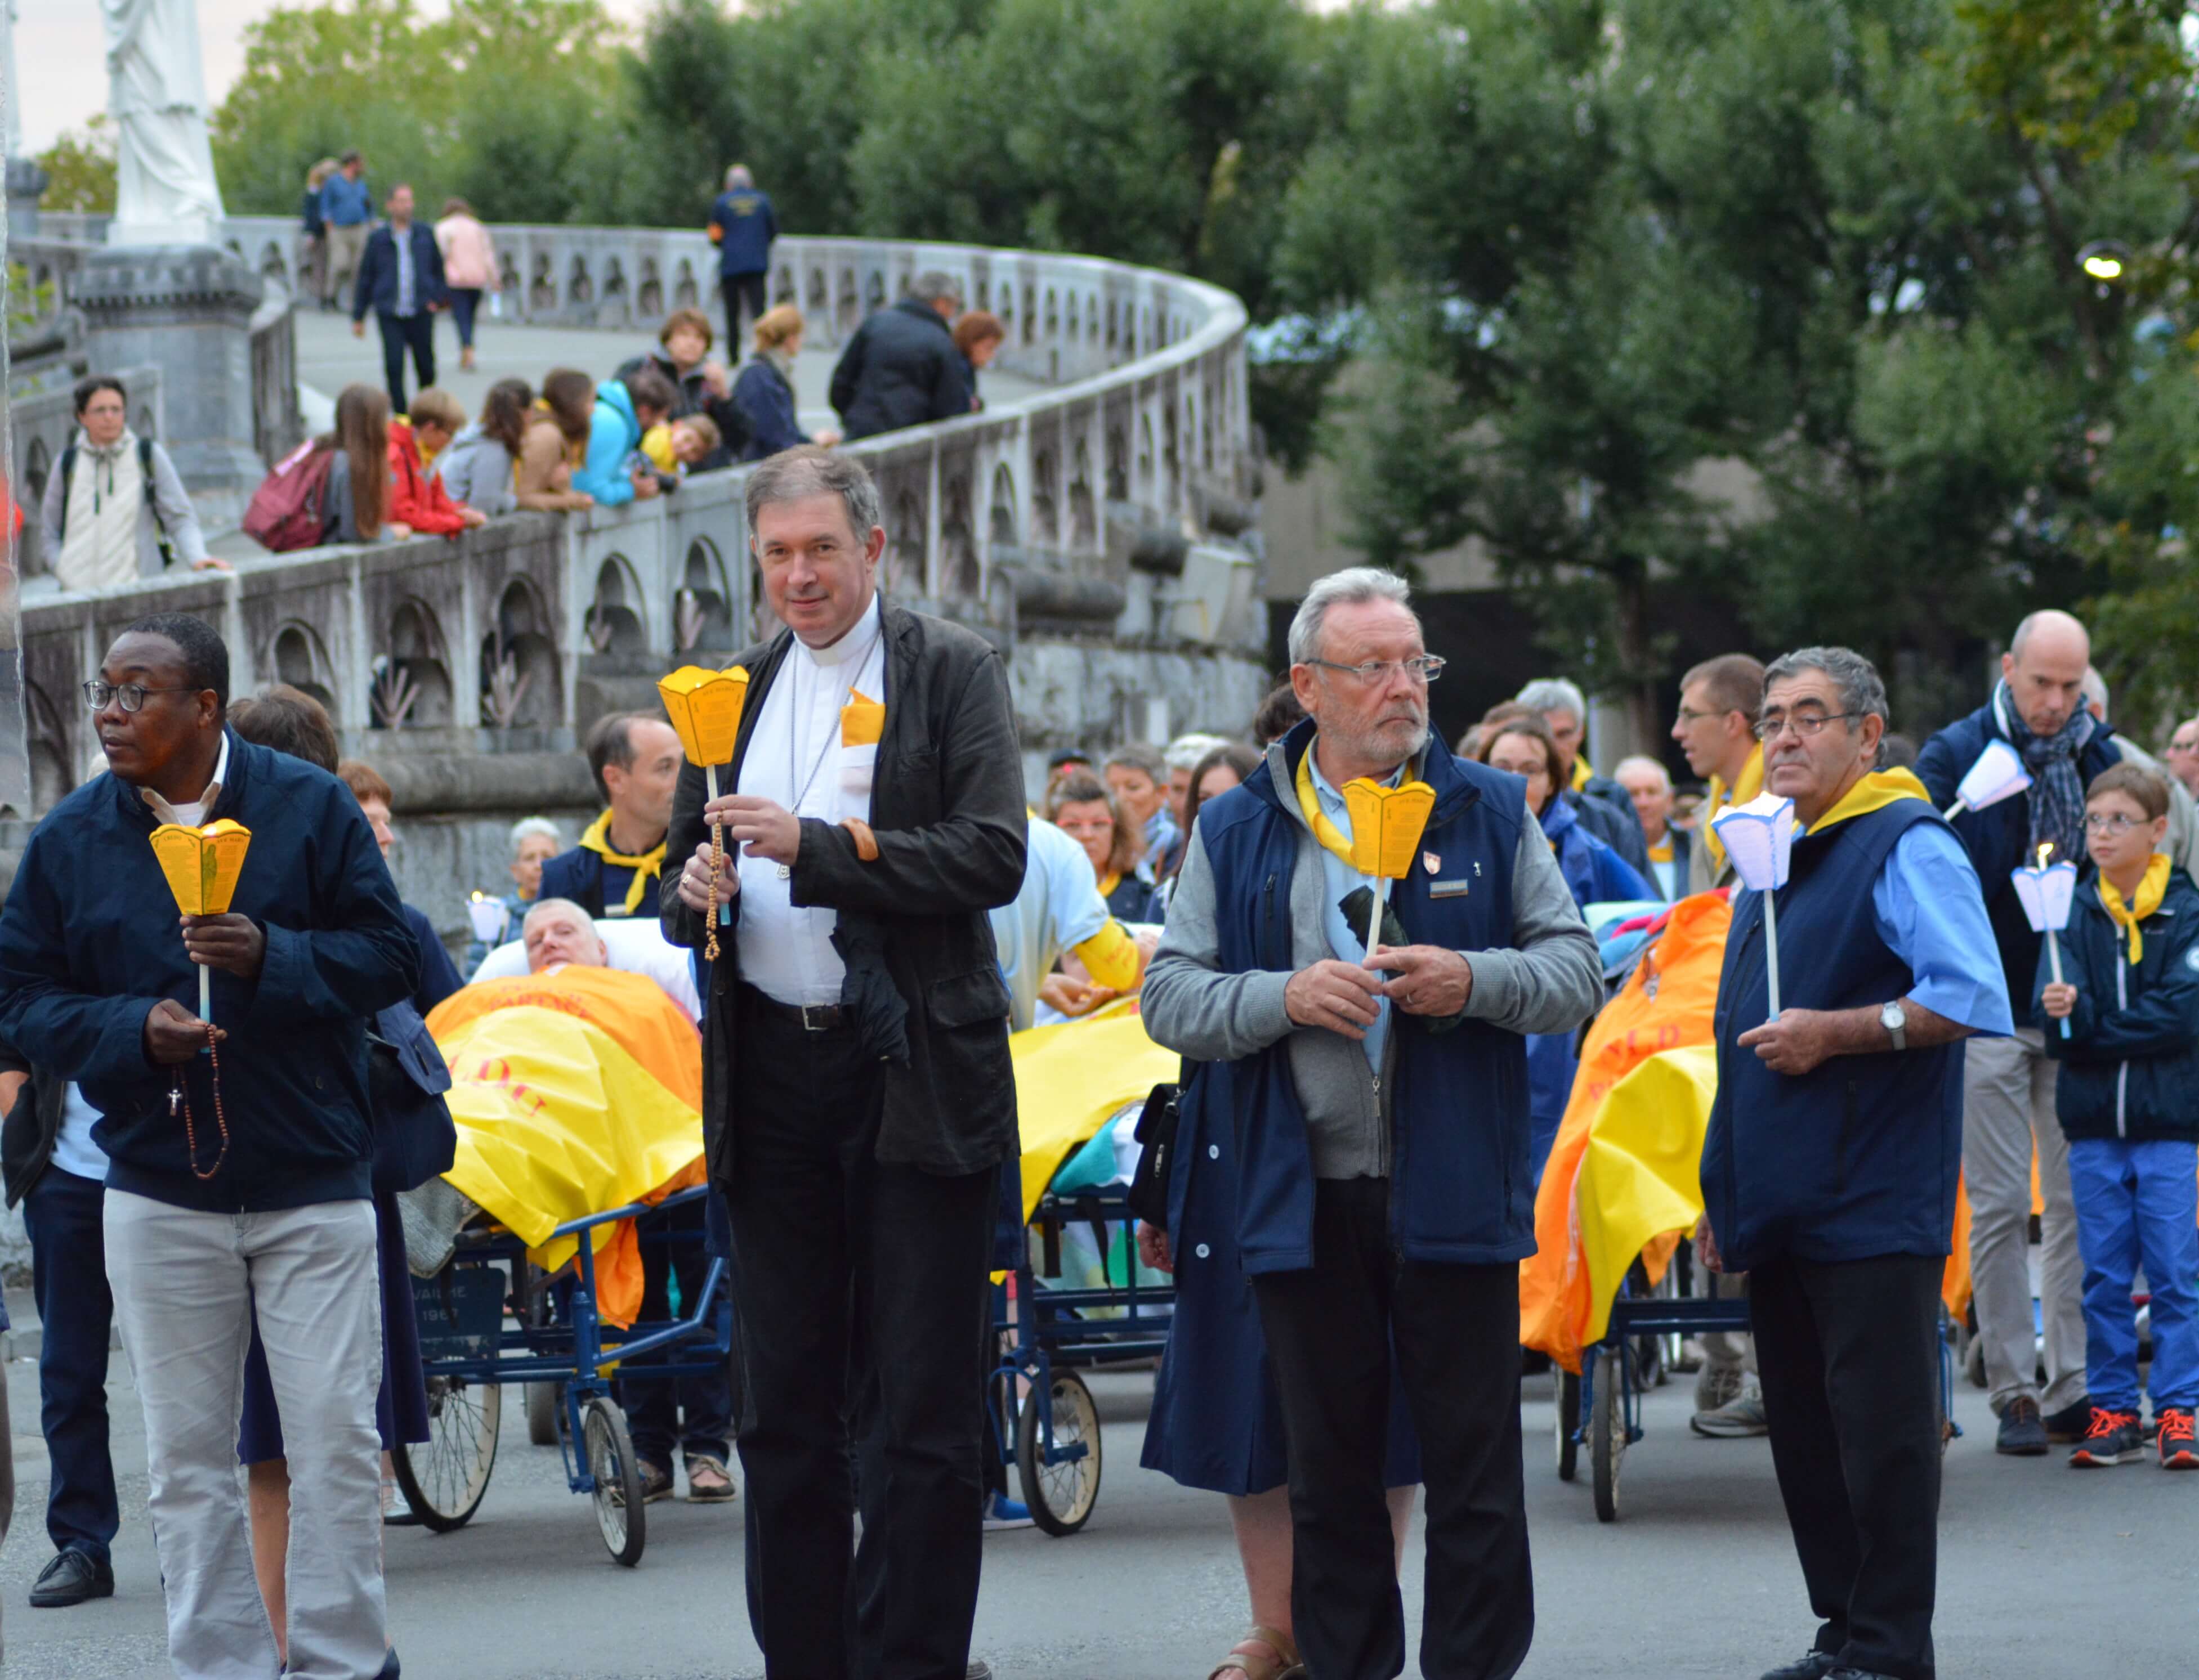 97.Procession mariale